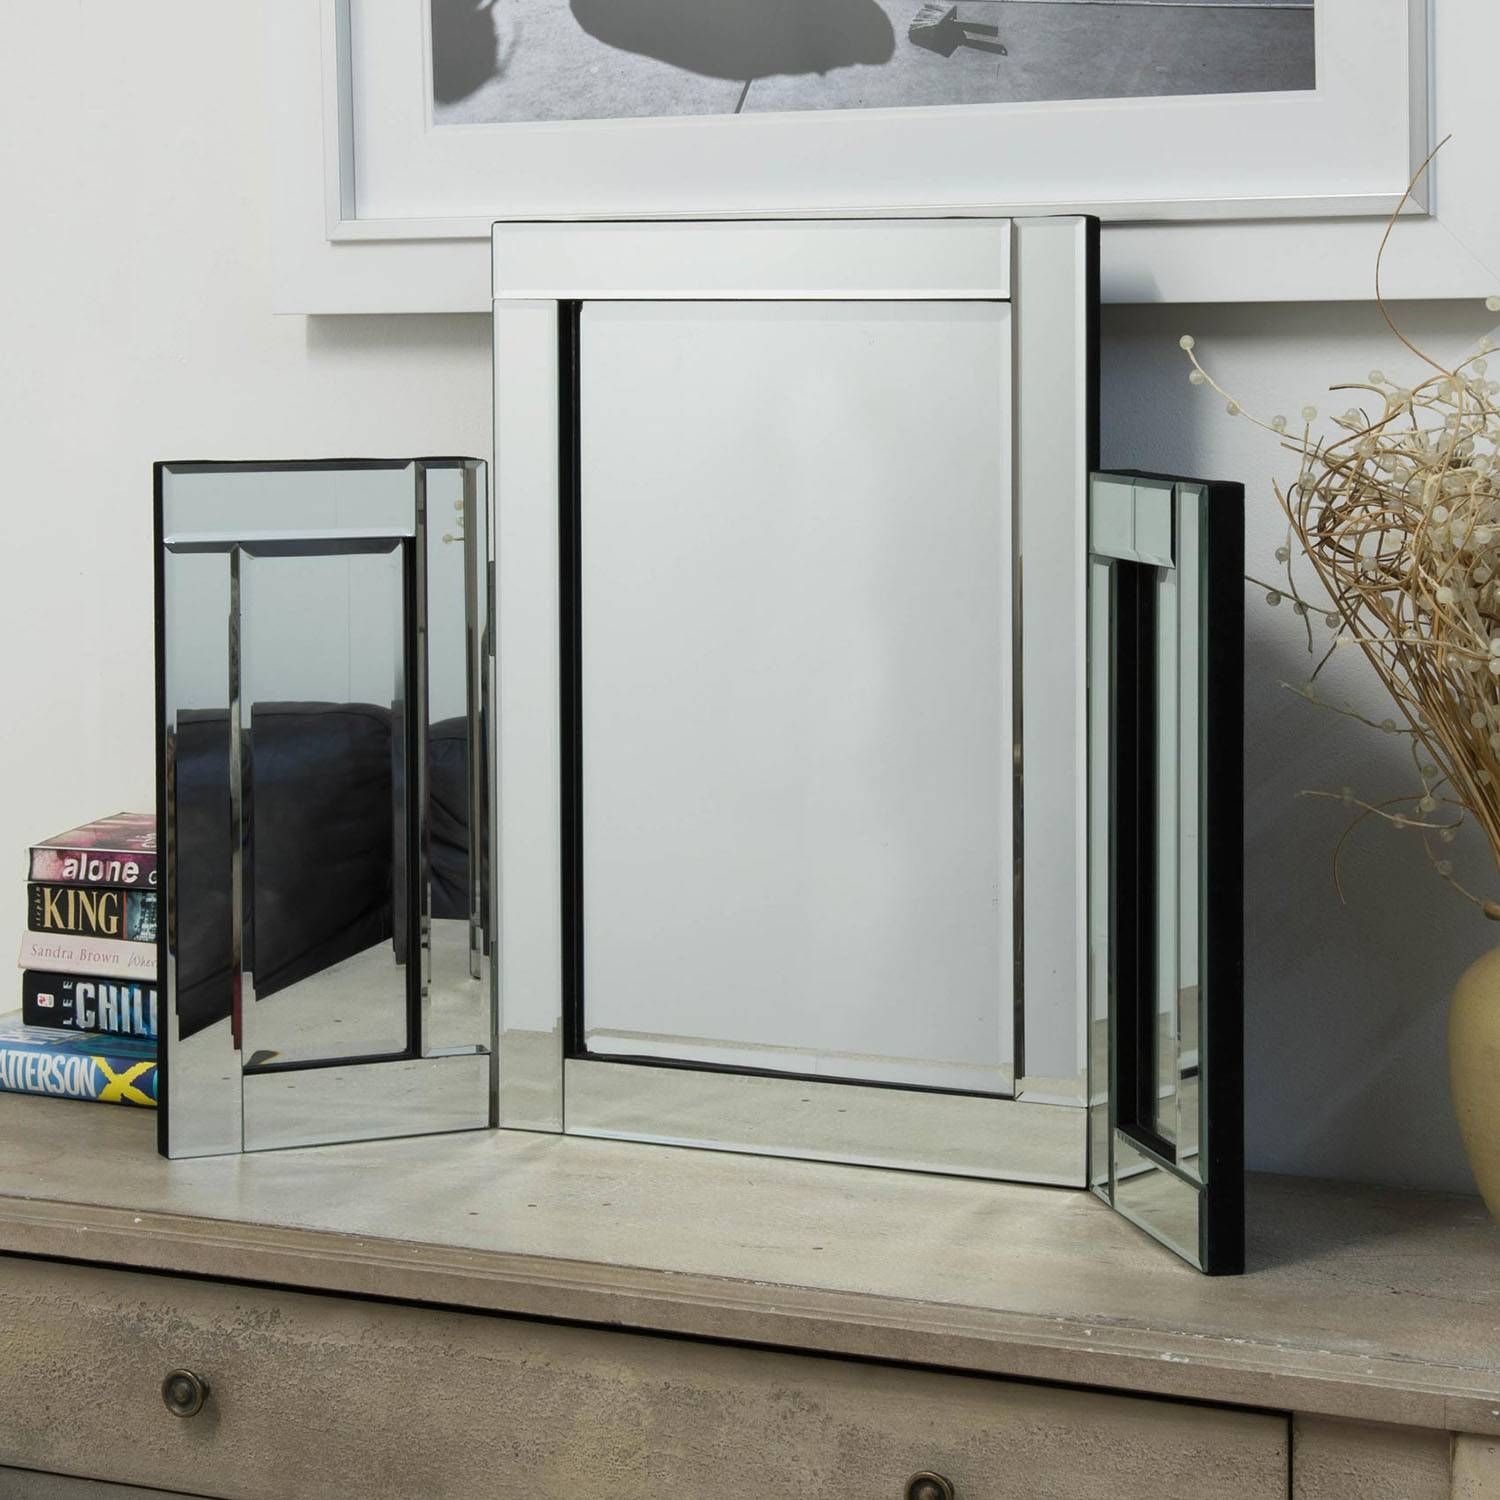 Venetian Dressing Table Mirror | Shop For Cheap Products And Save Pertaining To Venetian Dressing Table Mirrors (View 11 of 15)